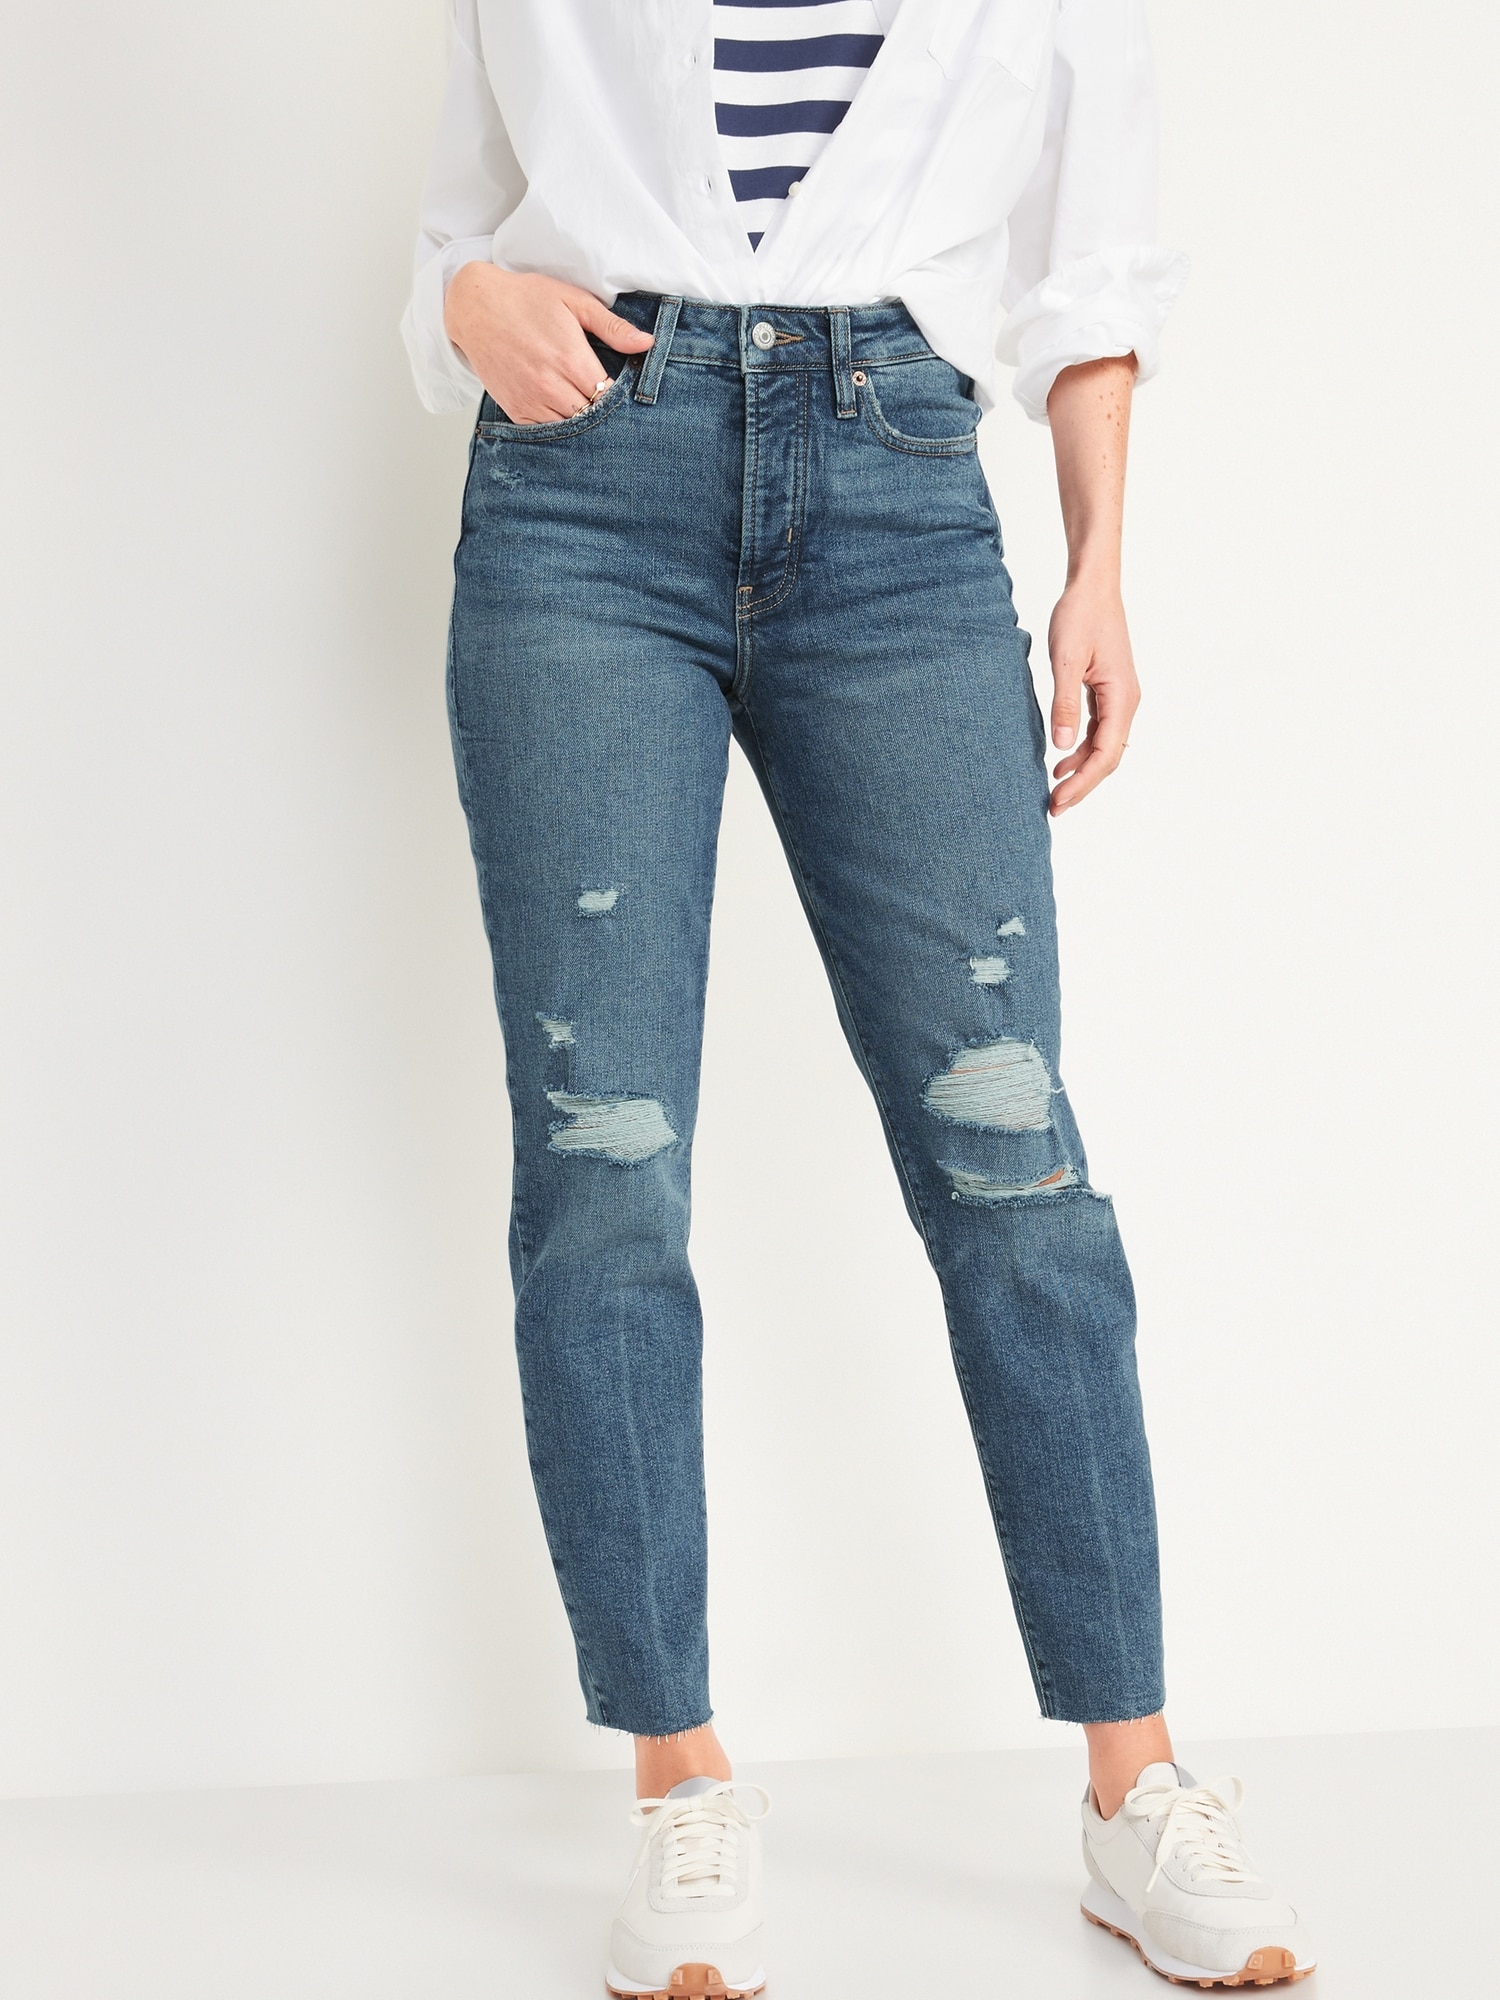 Old Navy High-Waisted Button-Fly OG Straight Ripped Ankle Jeans for Women blue. 1